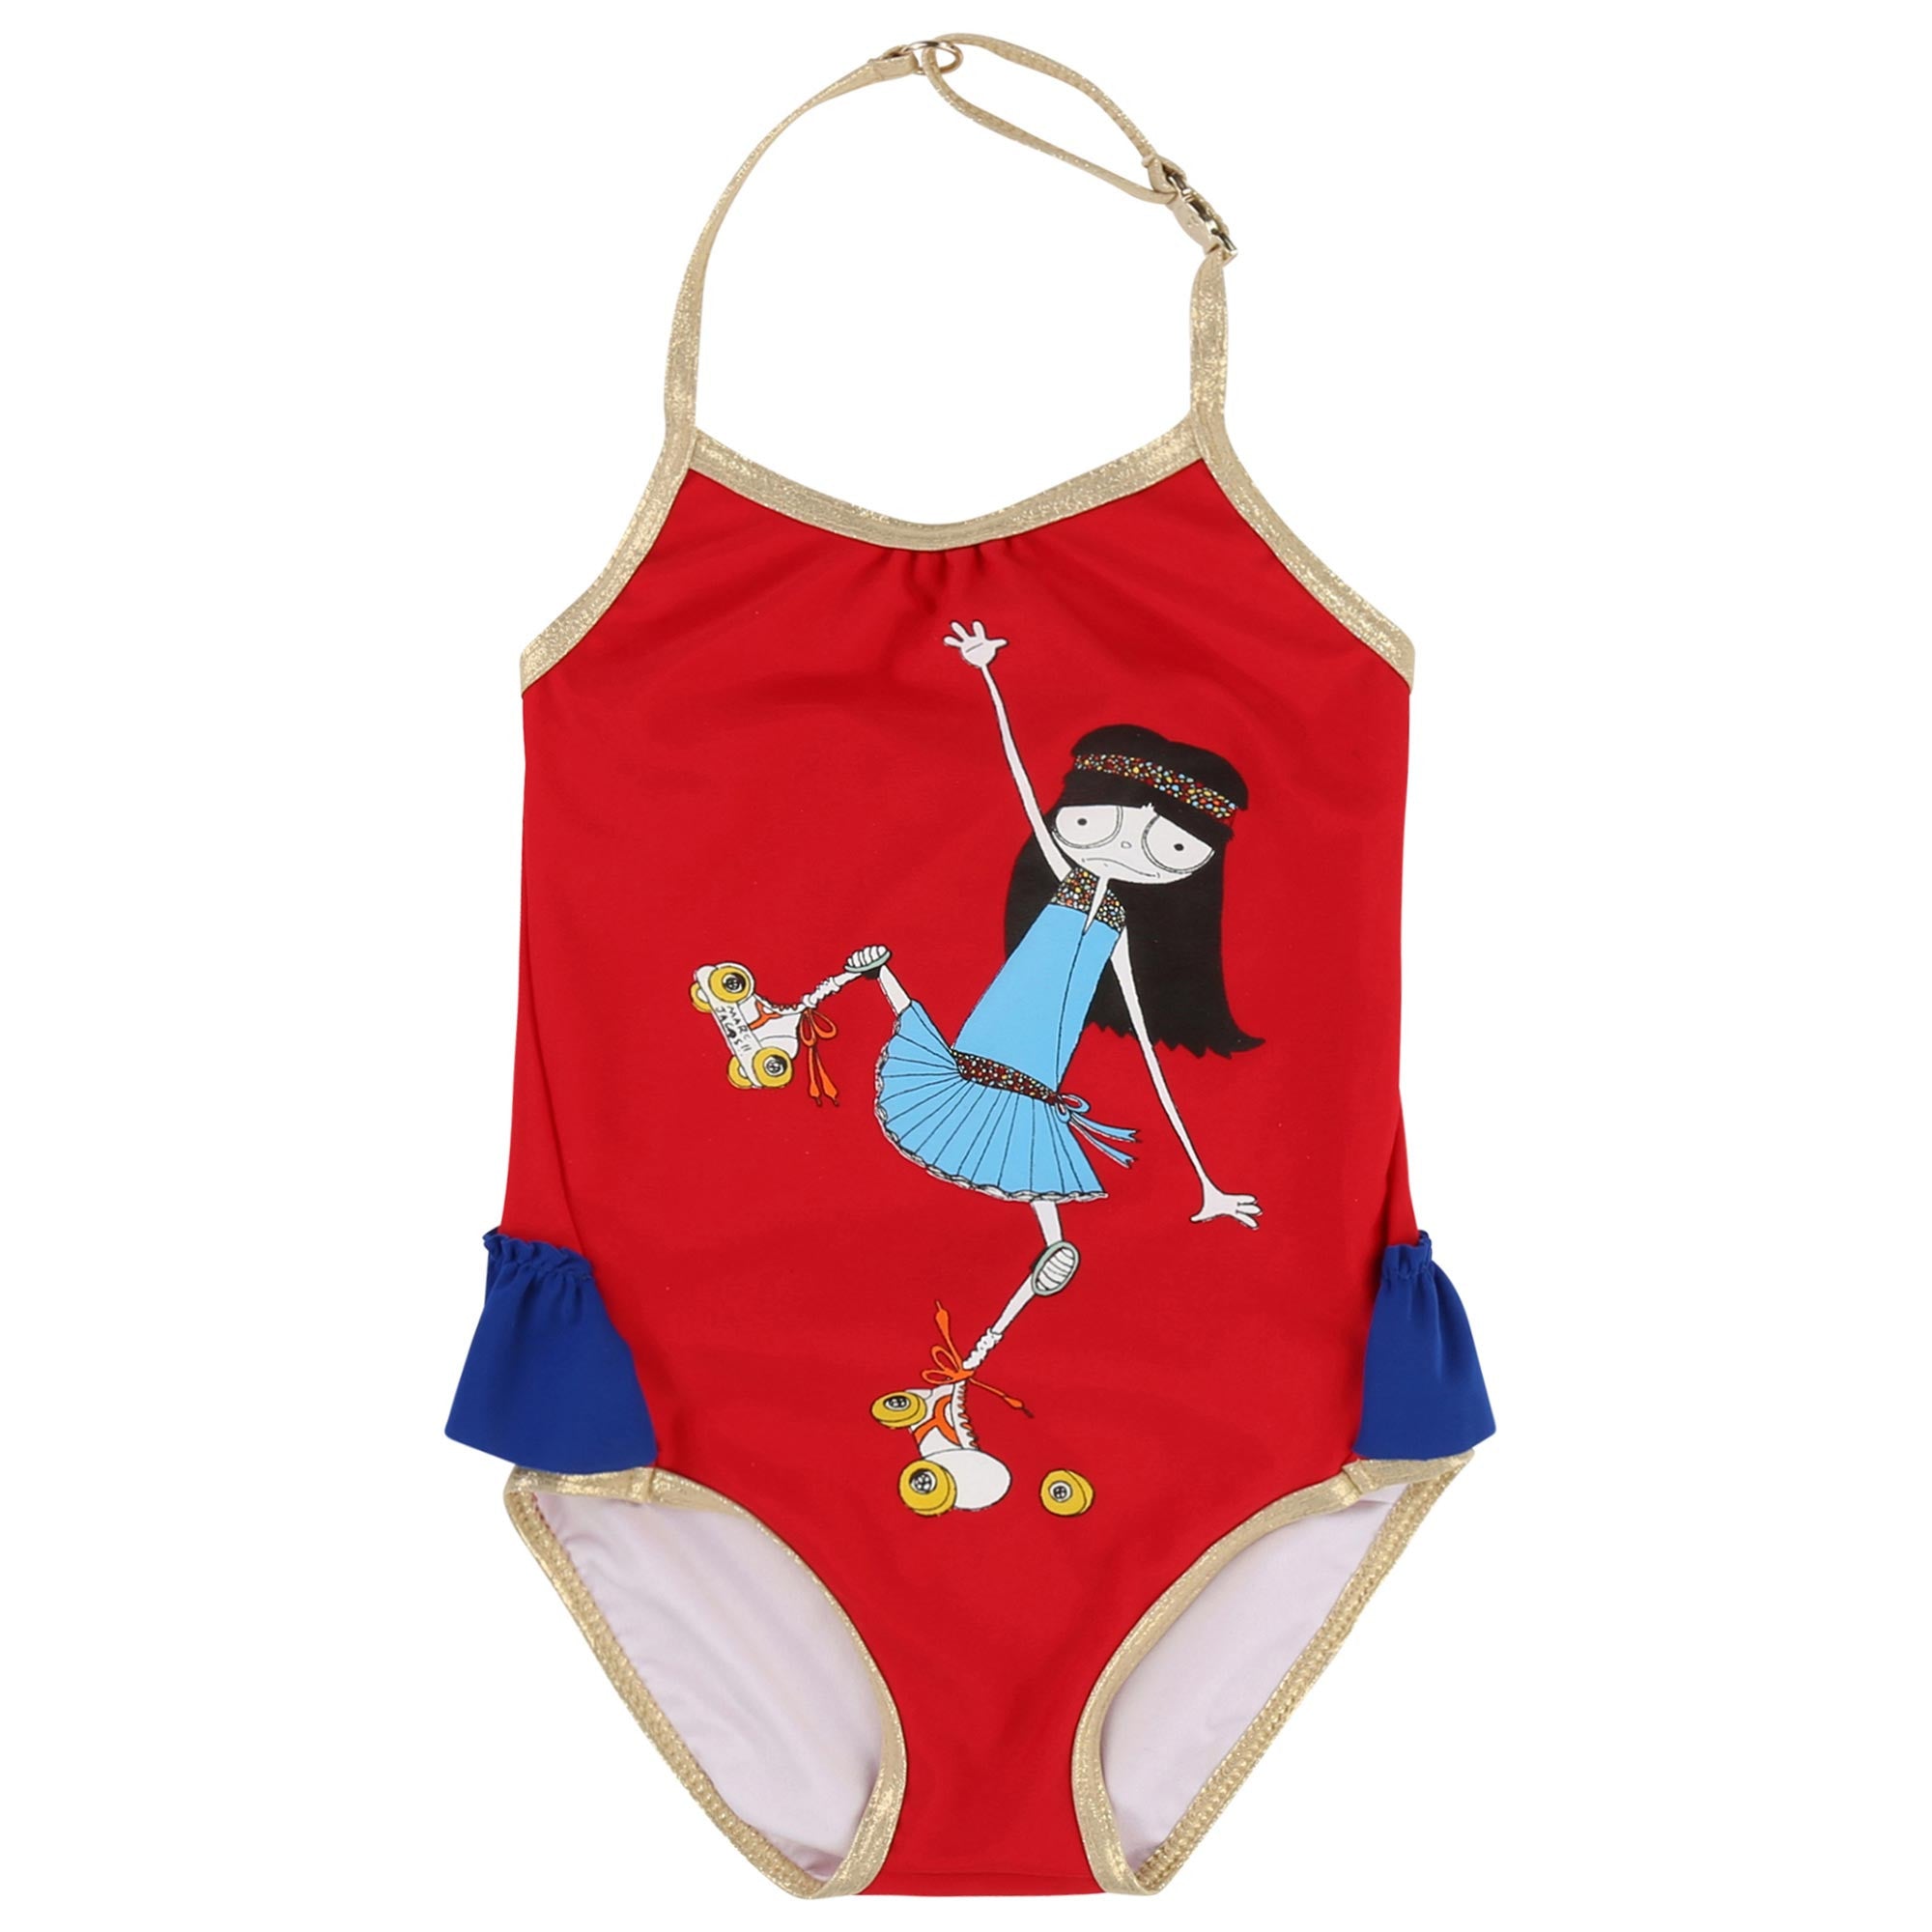 Baby Girls Red Swimsuit - CÉMAROSE | Children's Fashion Store - 1